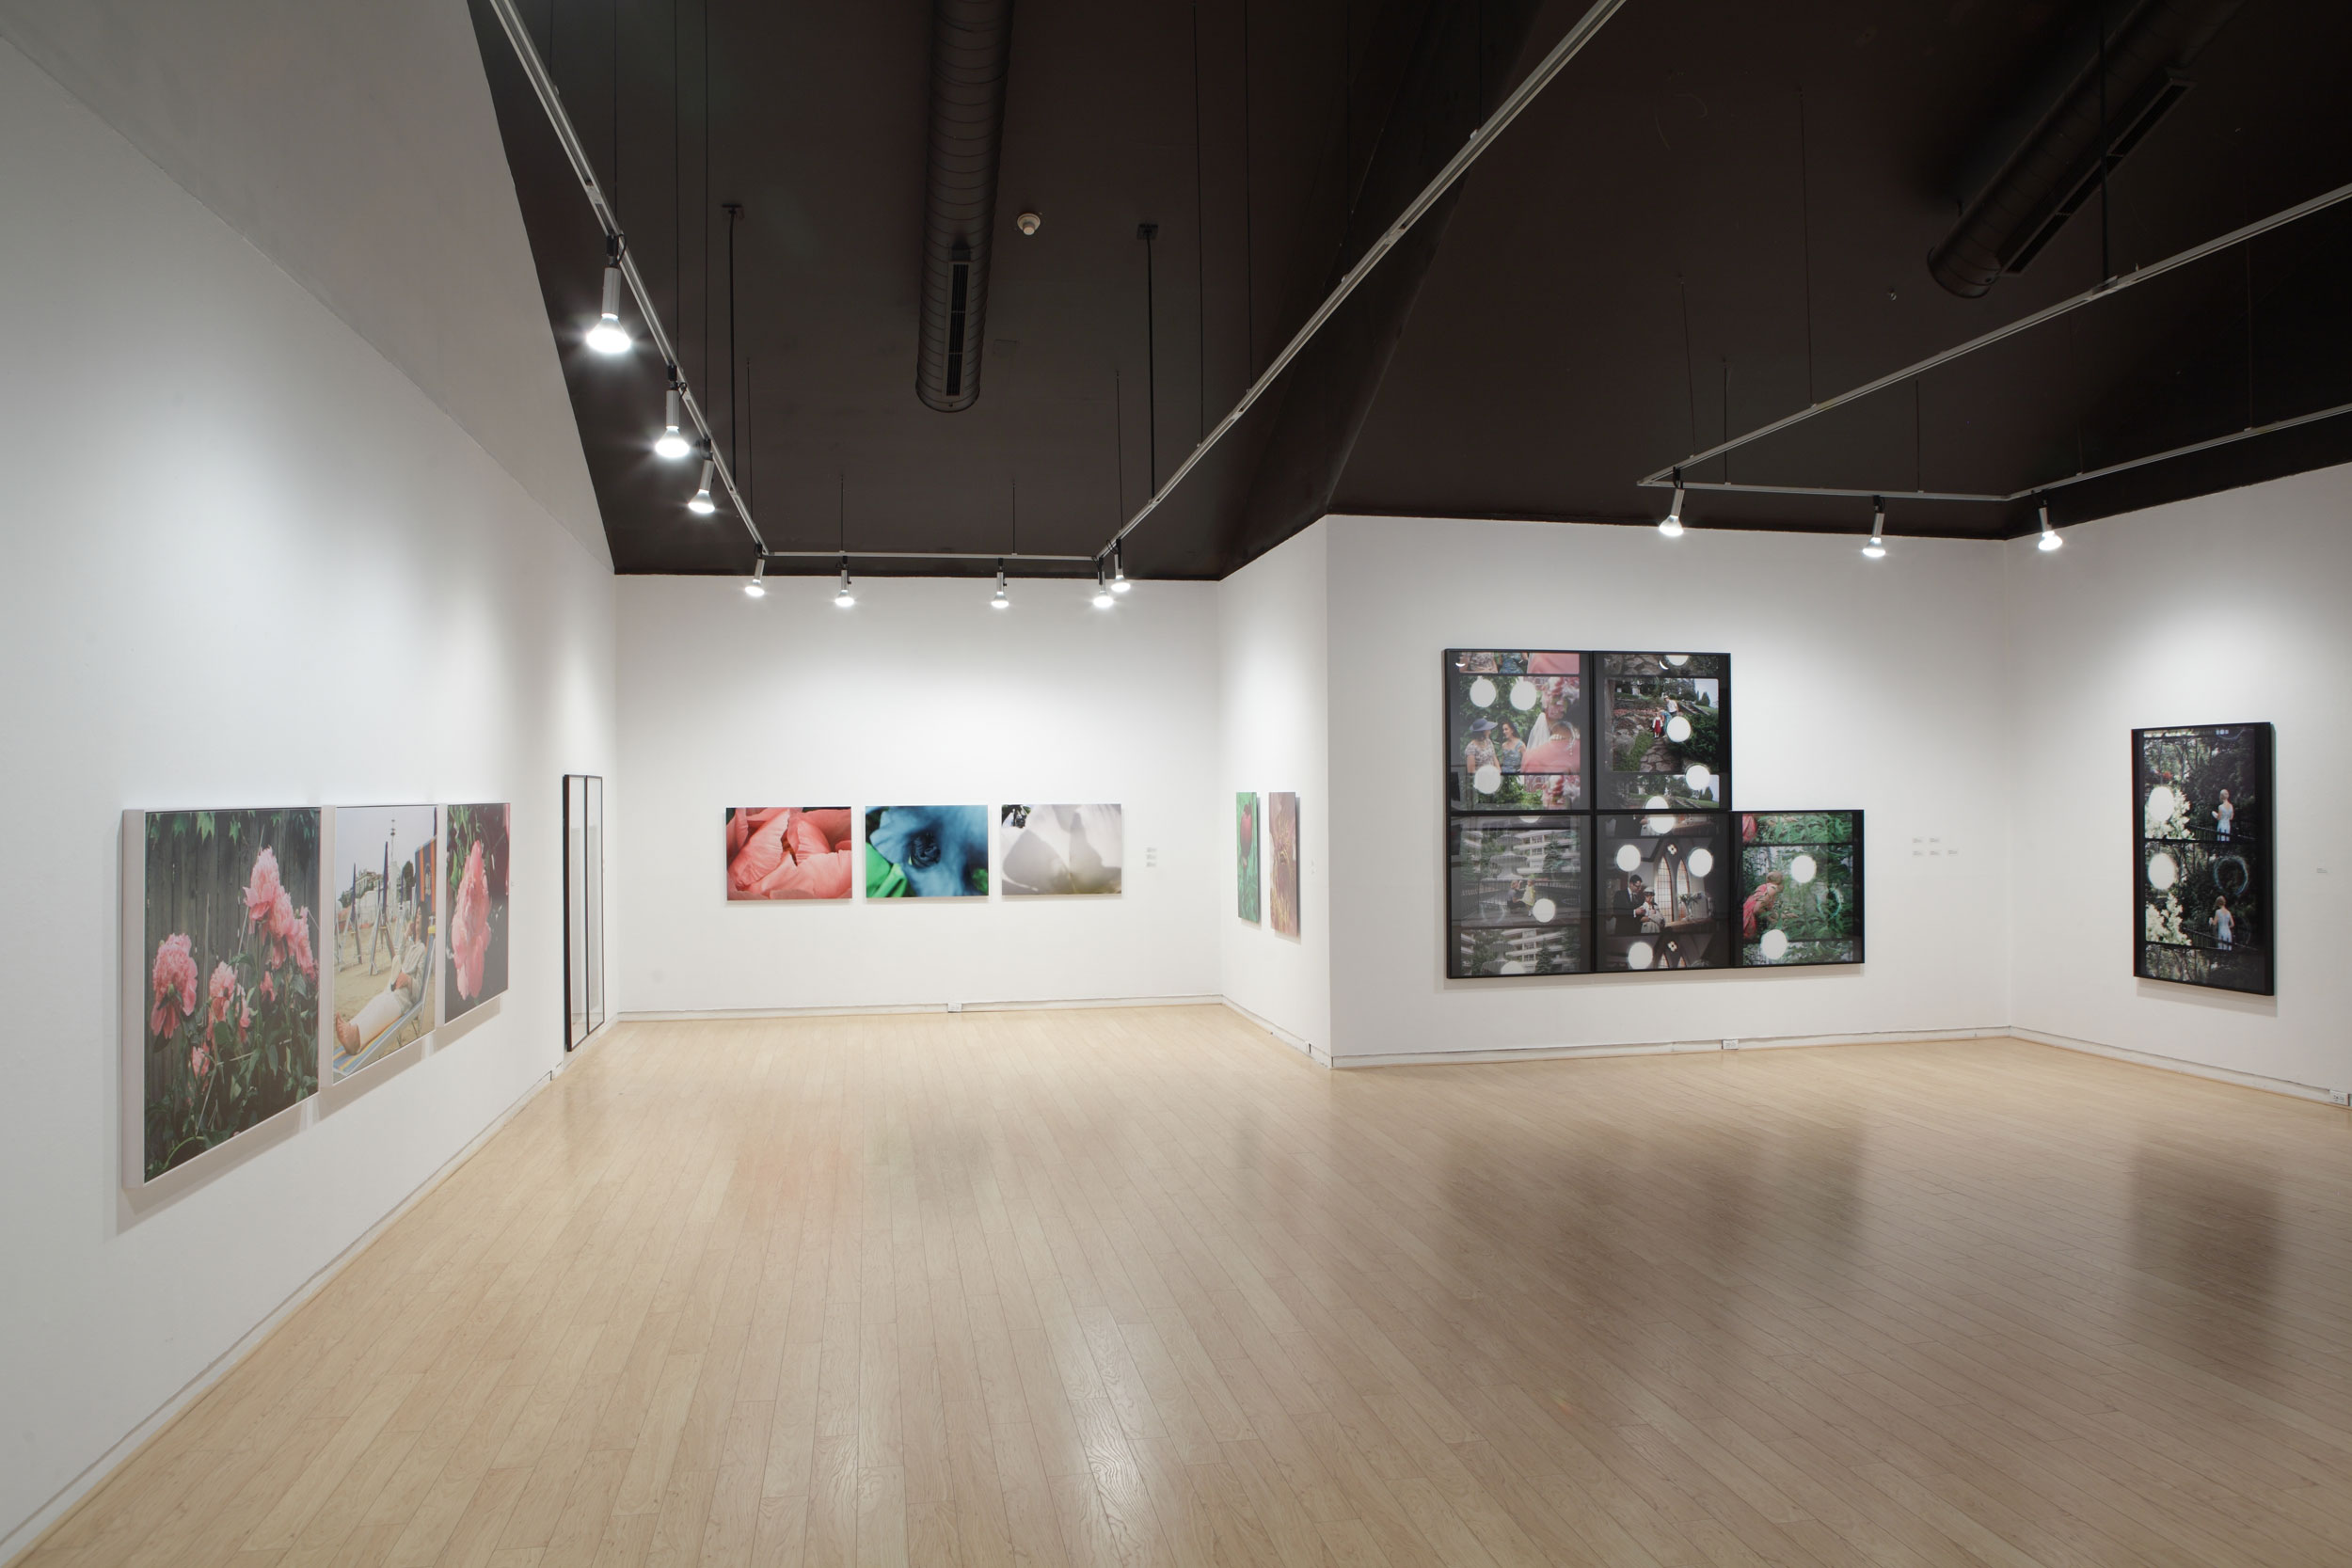 Gallery view of the exhibition Flowers and Photography. Multiple photographs installed in the AGP's main gallery.